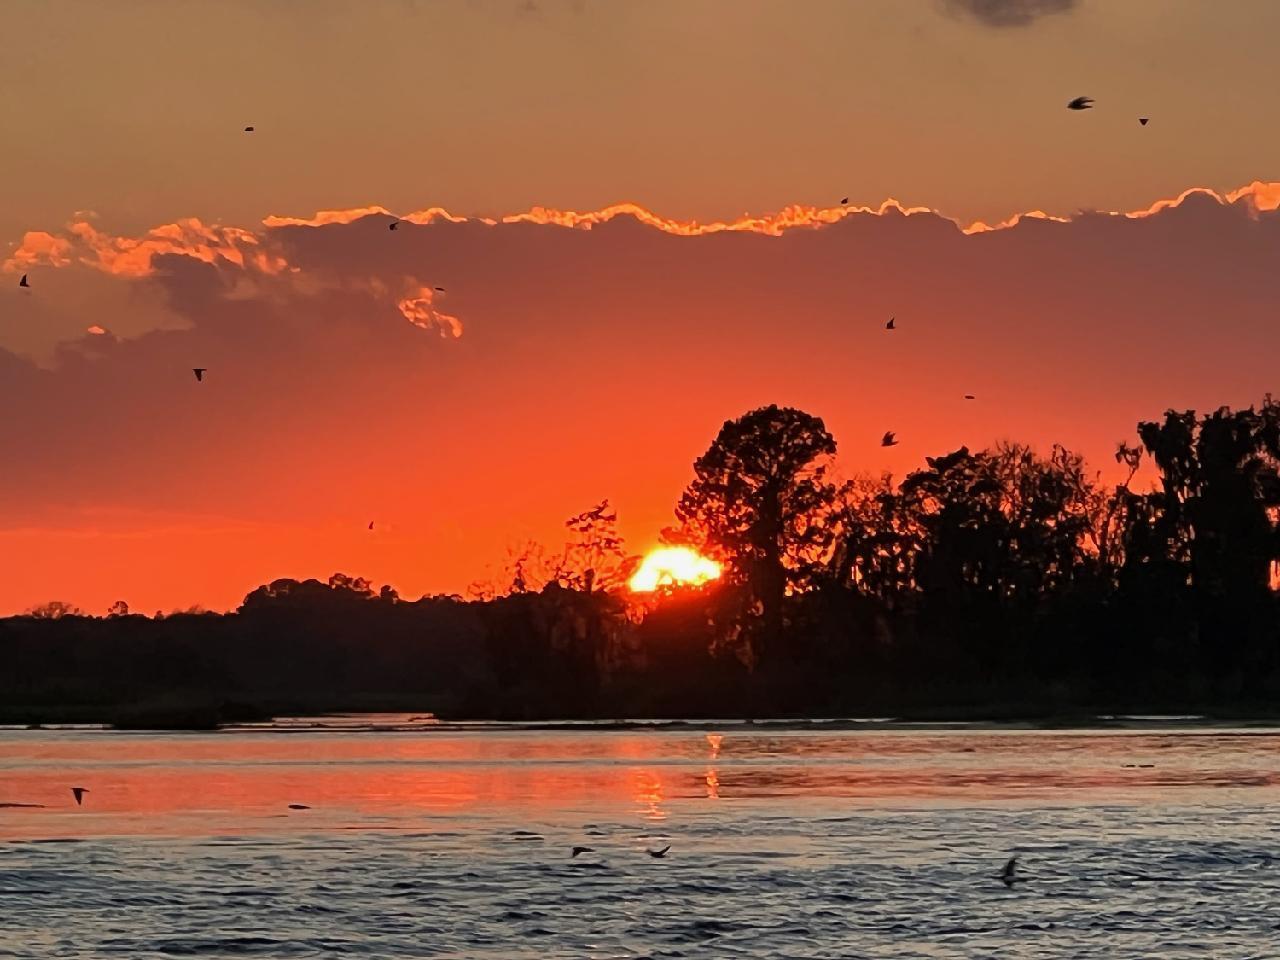 Sunset at the River